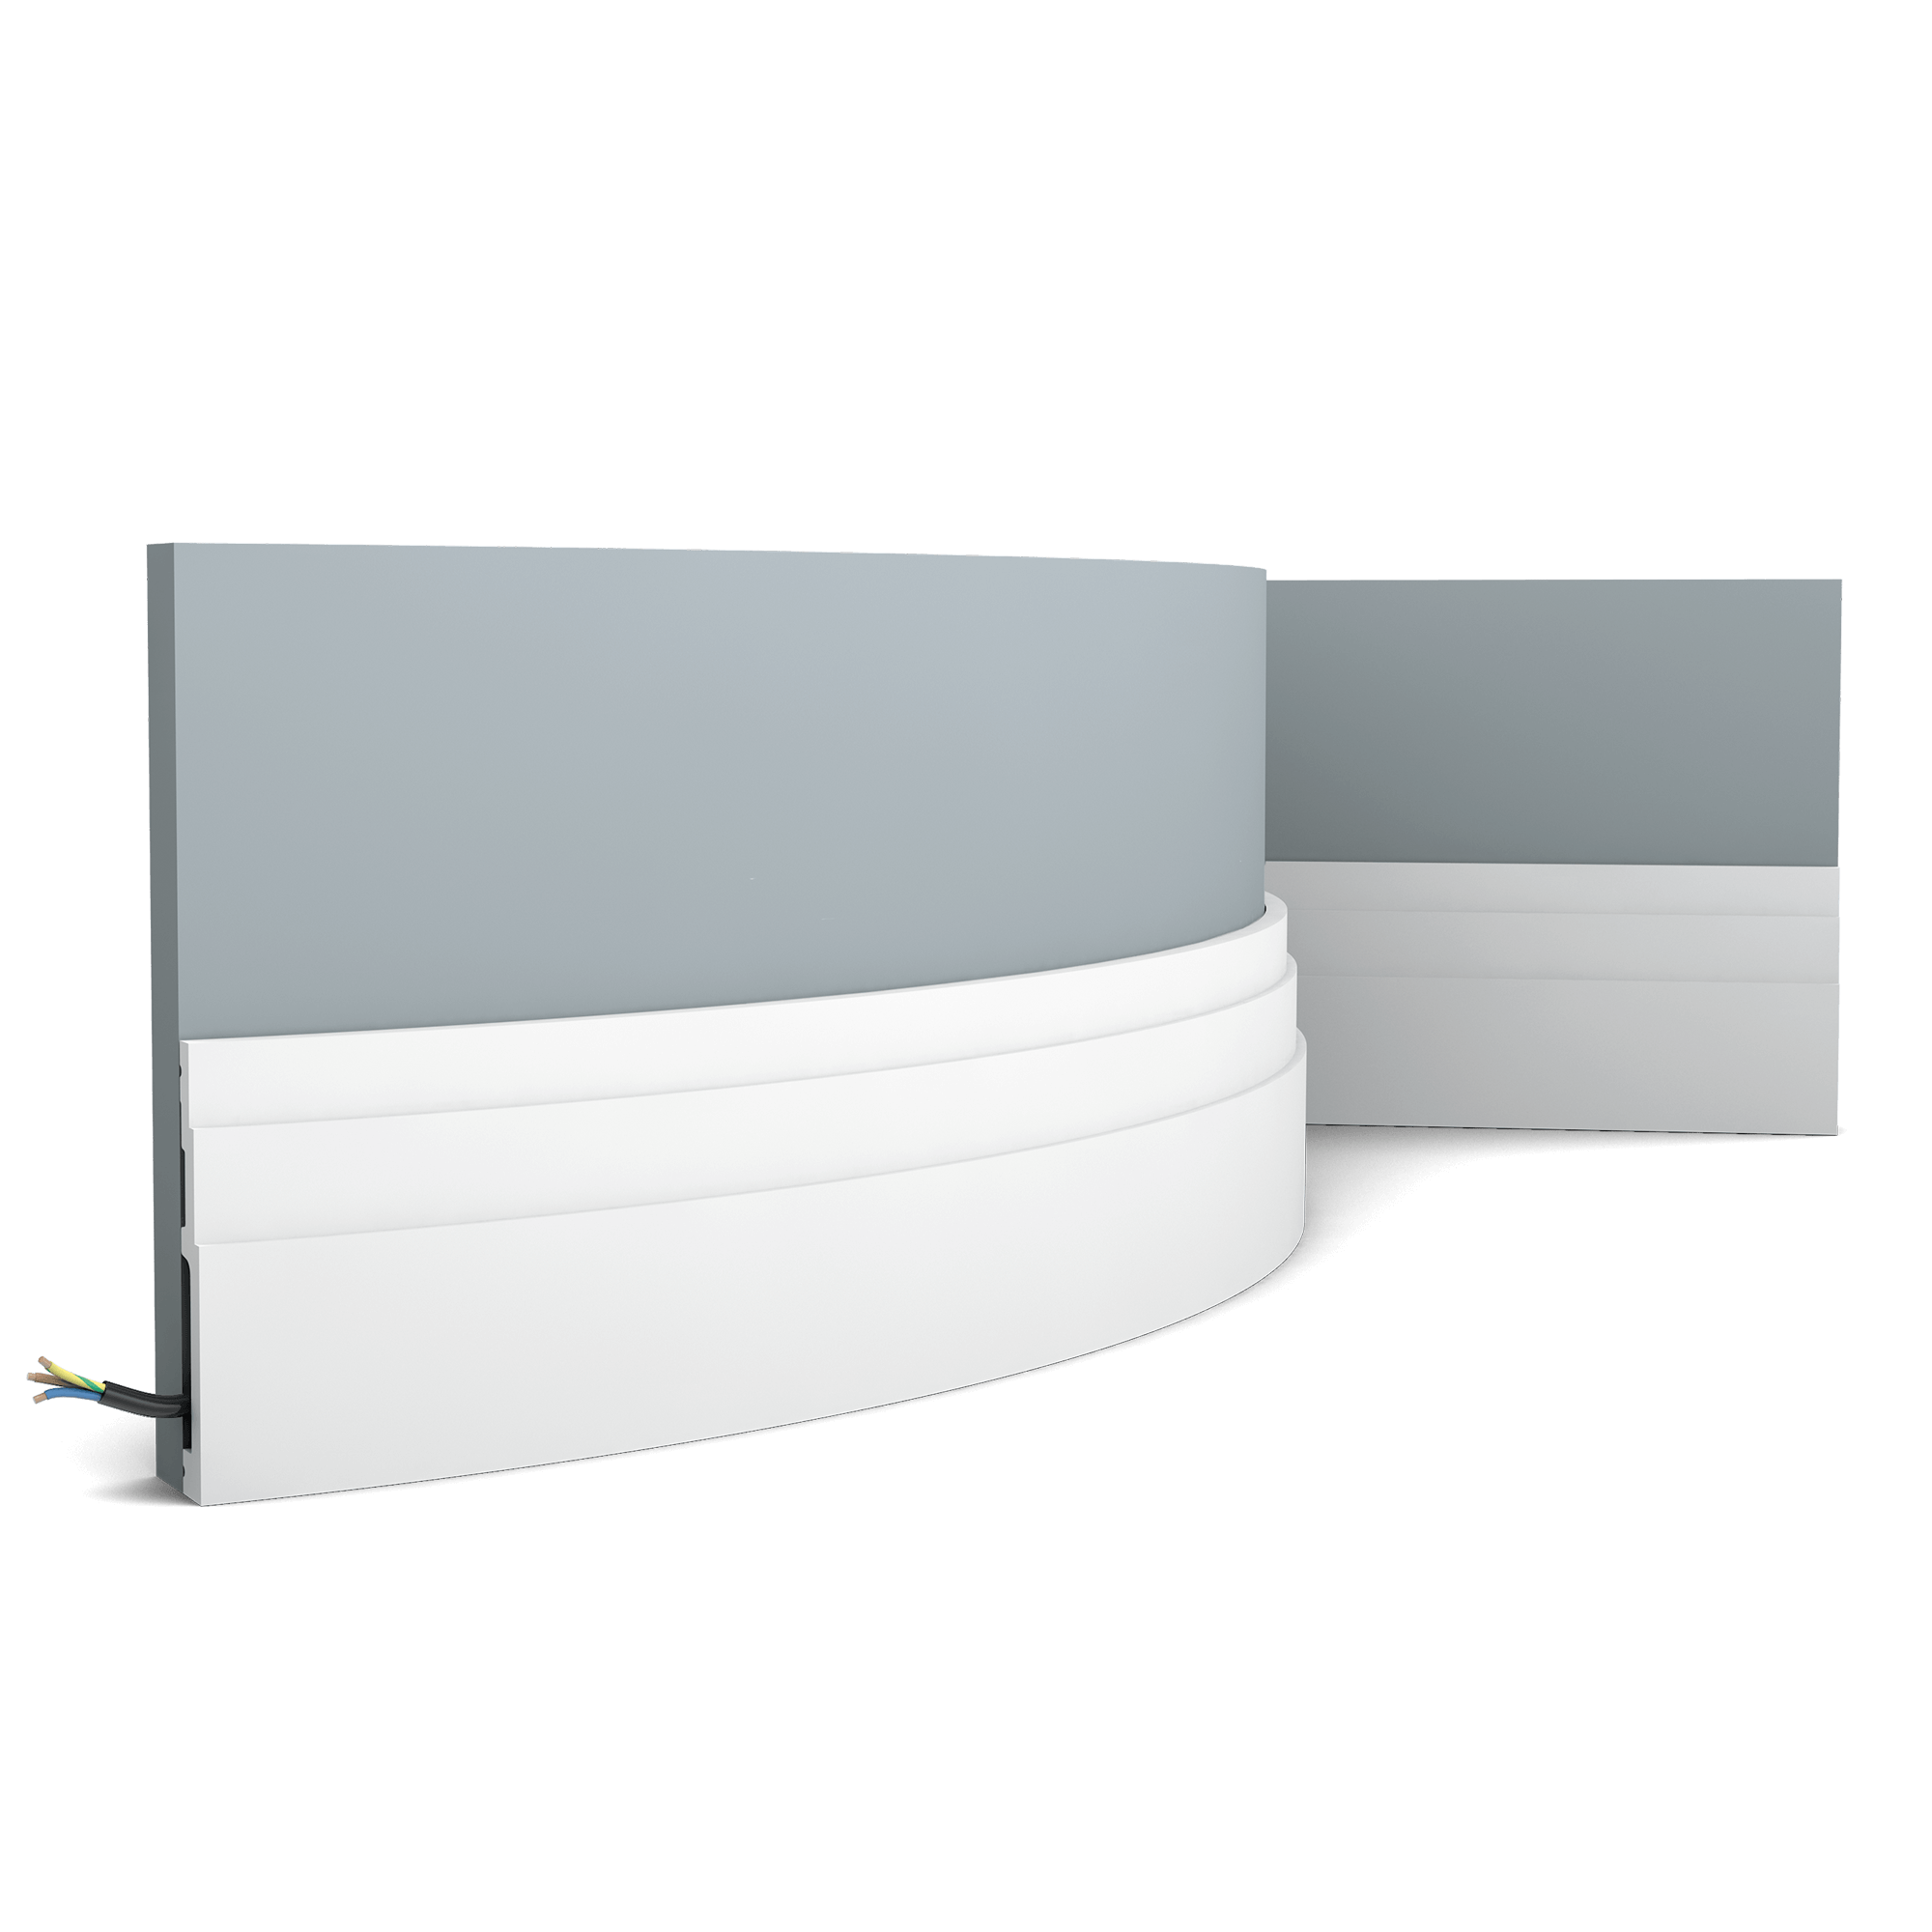 Flexible version of the SX180. The pure shape and perfect proportions of the High Line skirting boards create an ideal transition between floor and wall. Thanks to its Flex technology, curved walls and surfaces are no problem. Installation remark: It is necessary to screw this profile on the wall. Flex Radius: R min = 45 cm